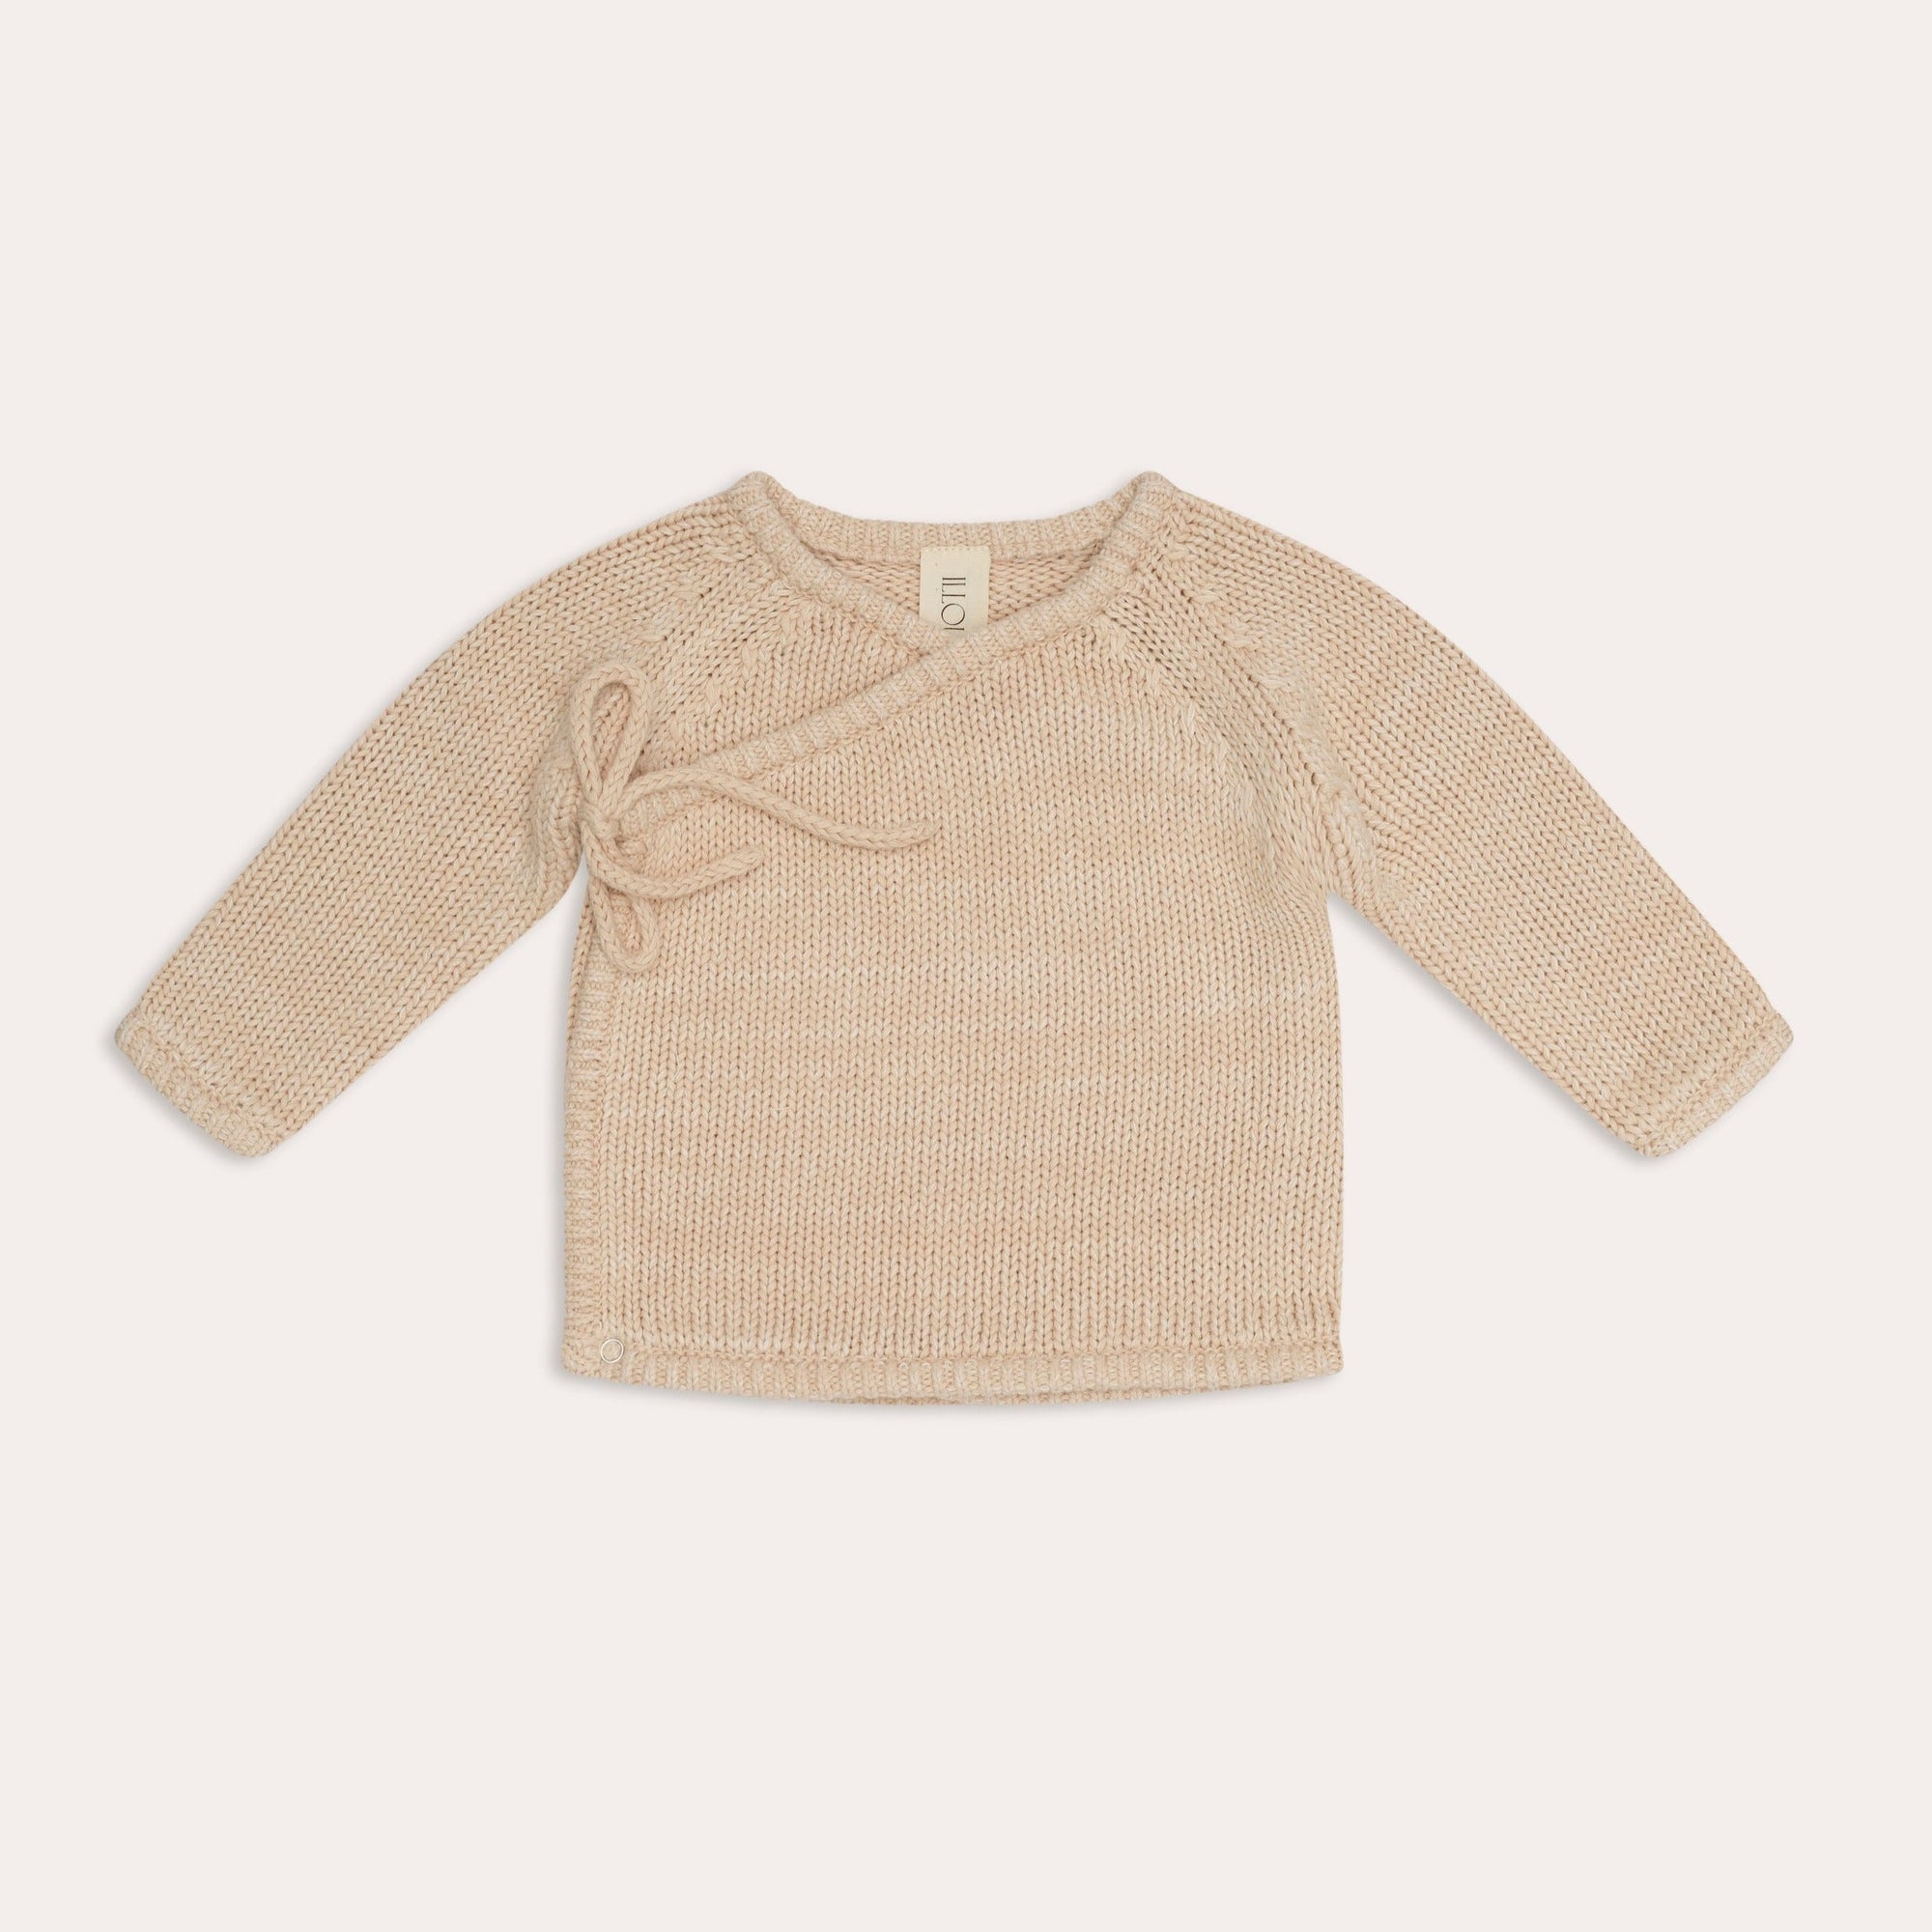 An illoura knit poet jumper in sand beige. (Brand Name: Illoura the Label)